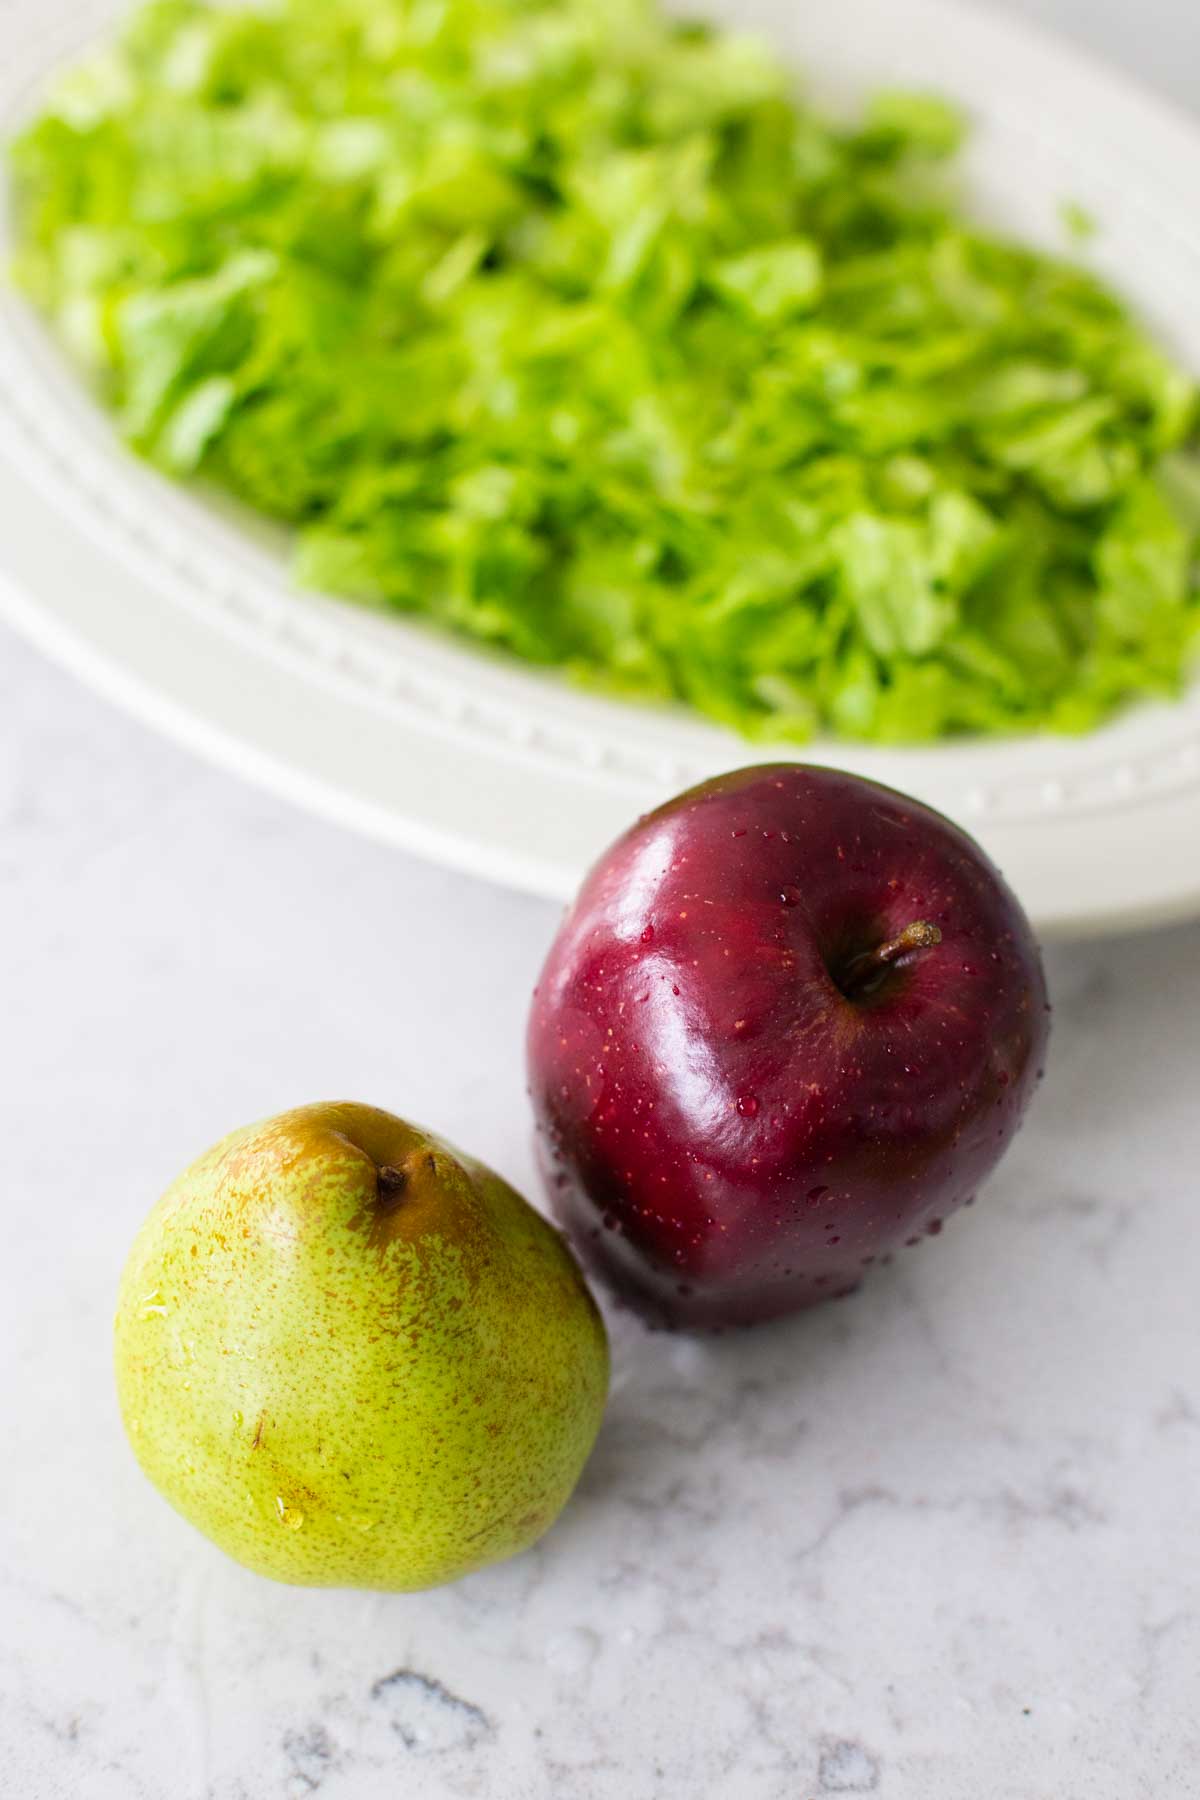 An apple and a pear sit in front of a platter of lettuce.